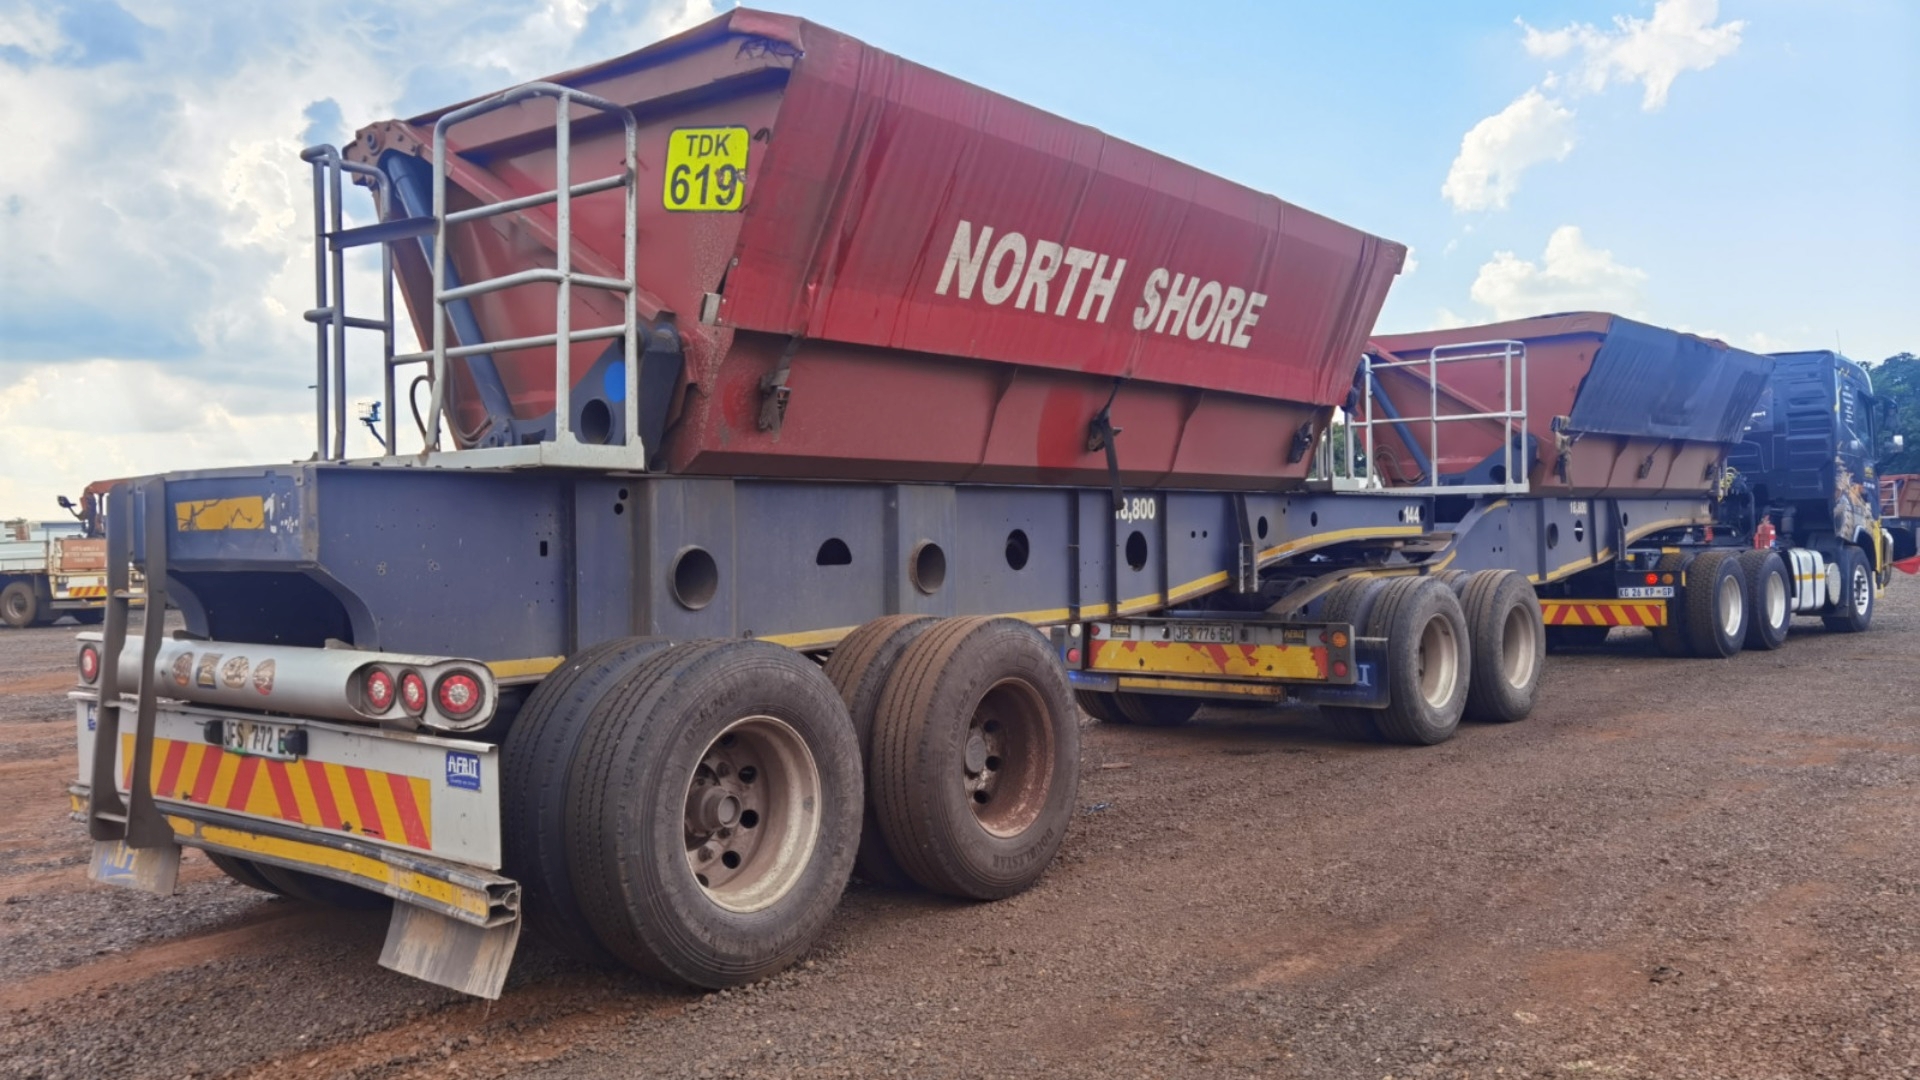 Trailers AFRIT SIDE TIPPER LINK 25CUBE for sale by WCT Auctions Pty Ltd  | Truck & Trailer Marketplaces